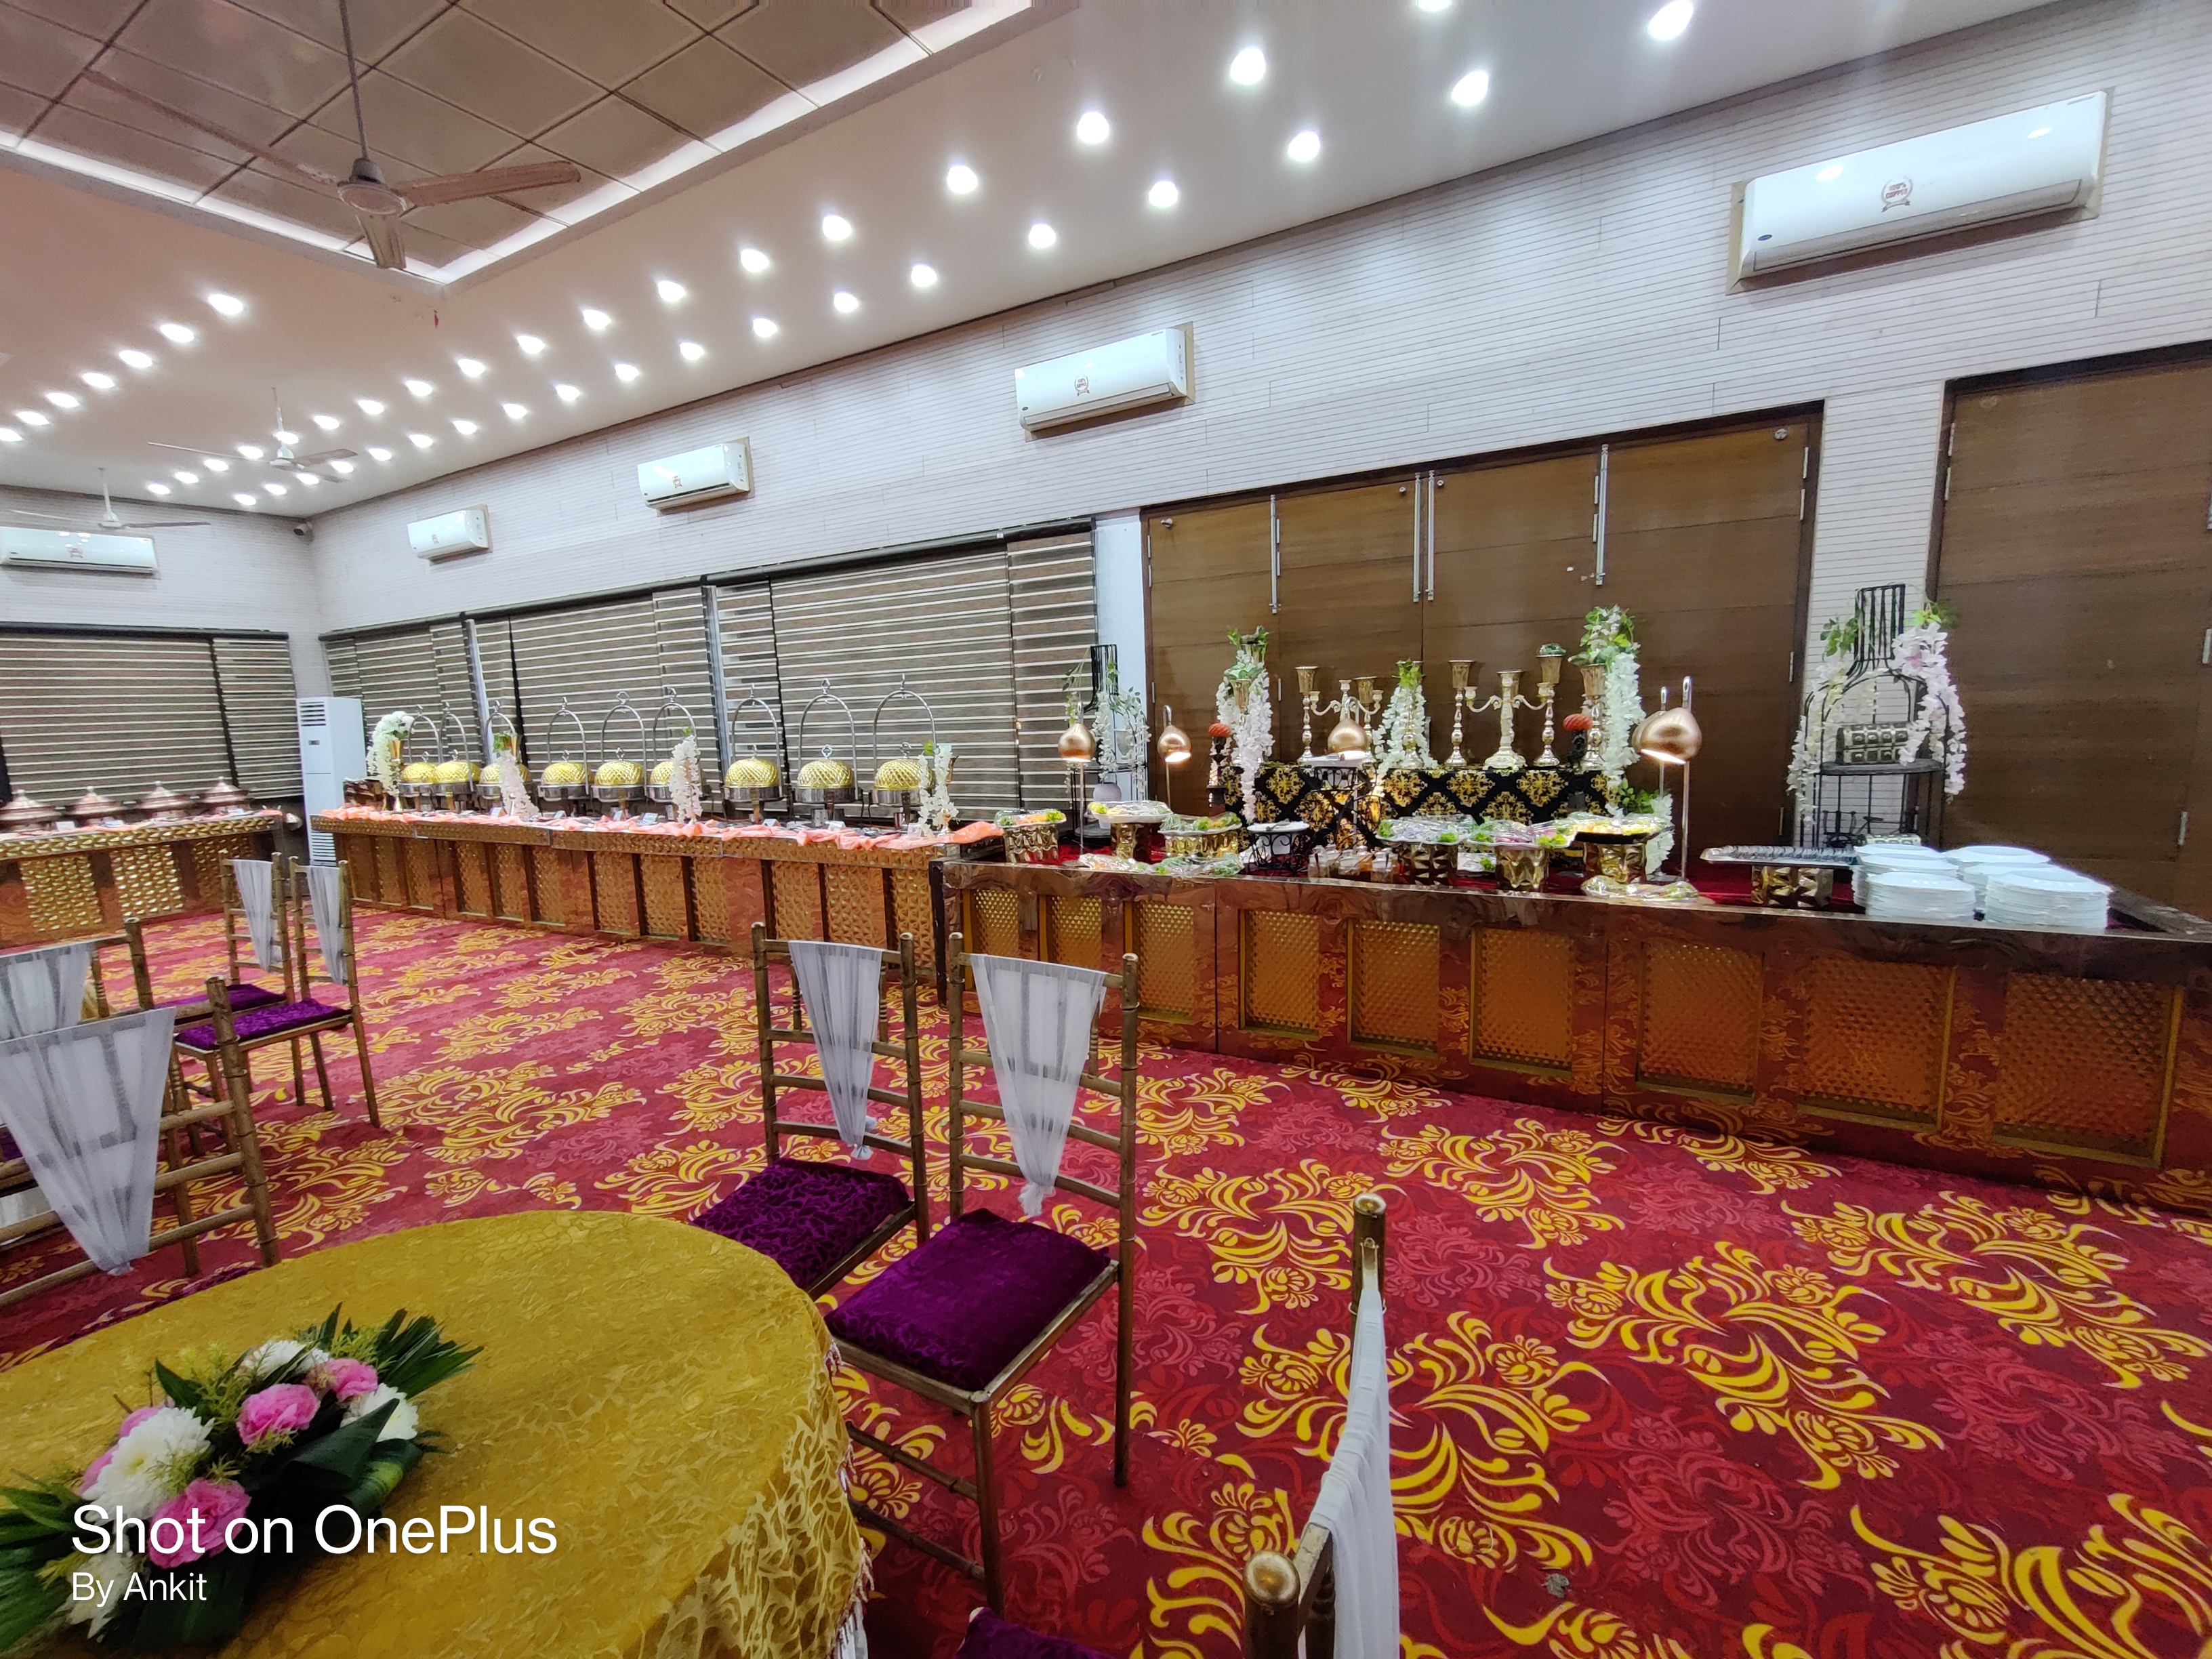 Red tag caterers Established catering in Dehradun. | Red Tag Caterers | Best established catering in Dehradun, experienced catering in Dehradun, top quality service catering in Dehradun, best service provider catering in Dehradun, customer handling catering in Dehradun - GL85493